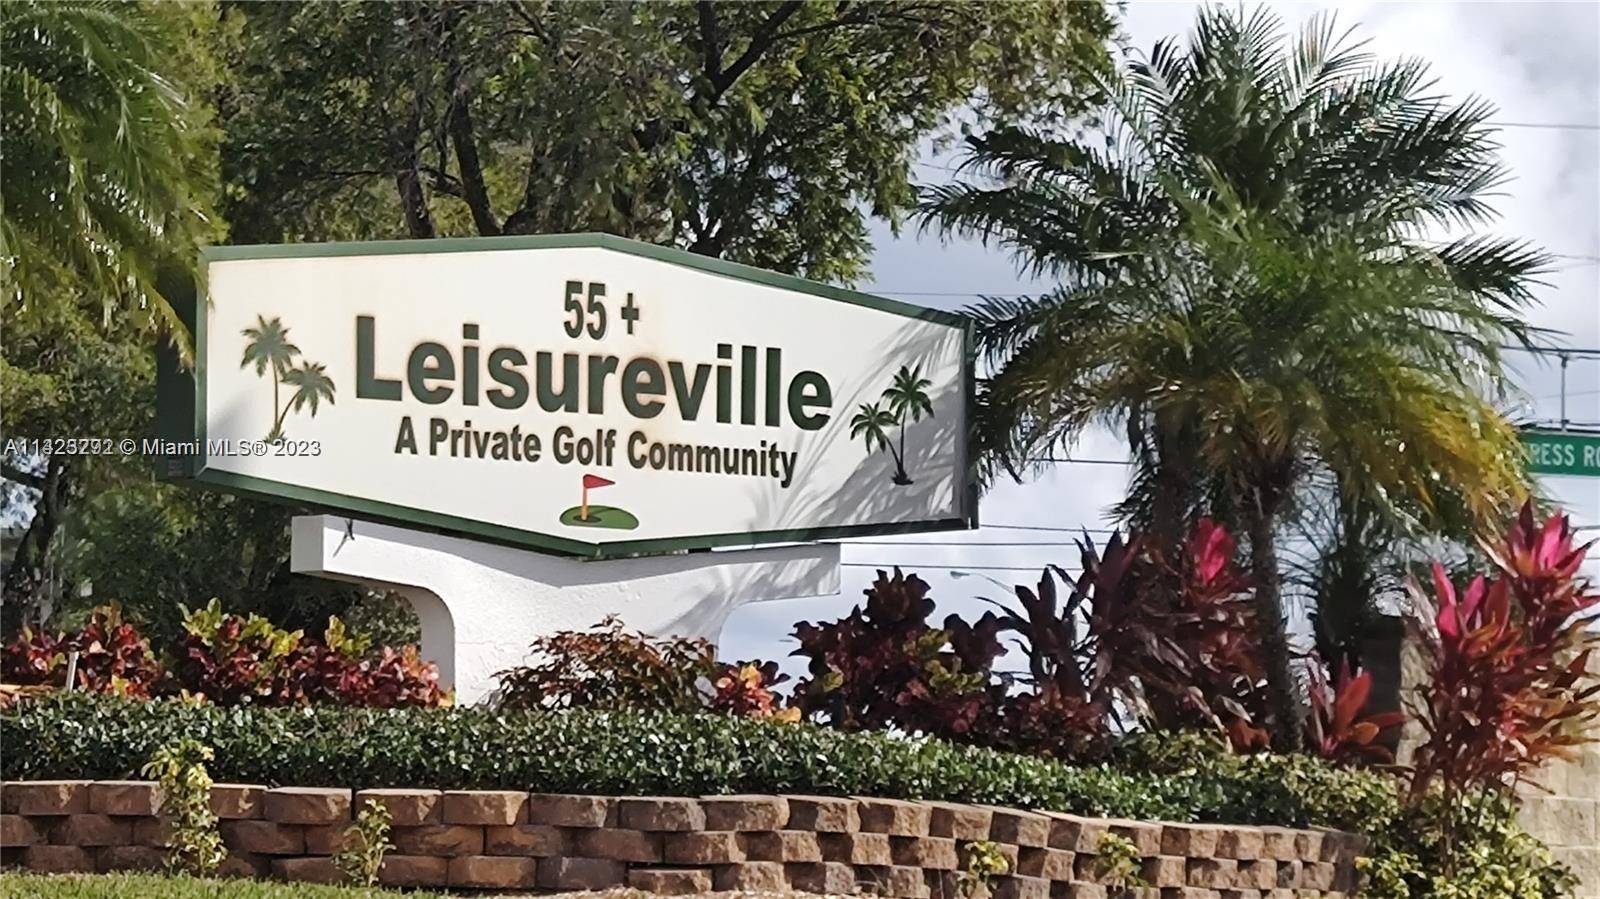 Leisureville Pompano Beach 55 Golf Community with free Golf Course for Residents, Community Heated Pool, Club House, Community Shuttle Bus, BBQ Picnic Area, Laundry Facilities and more 2nd Floor Unit ...